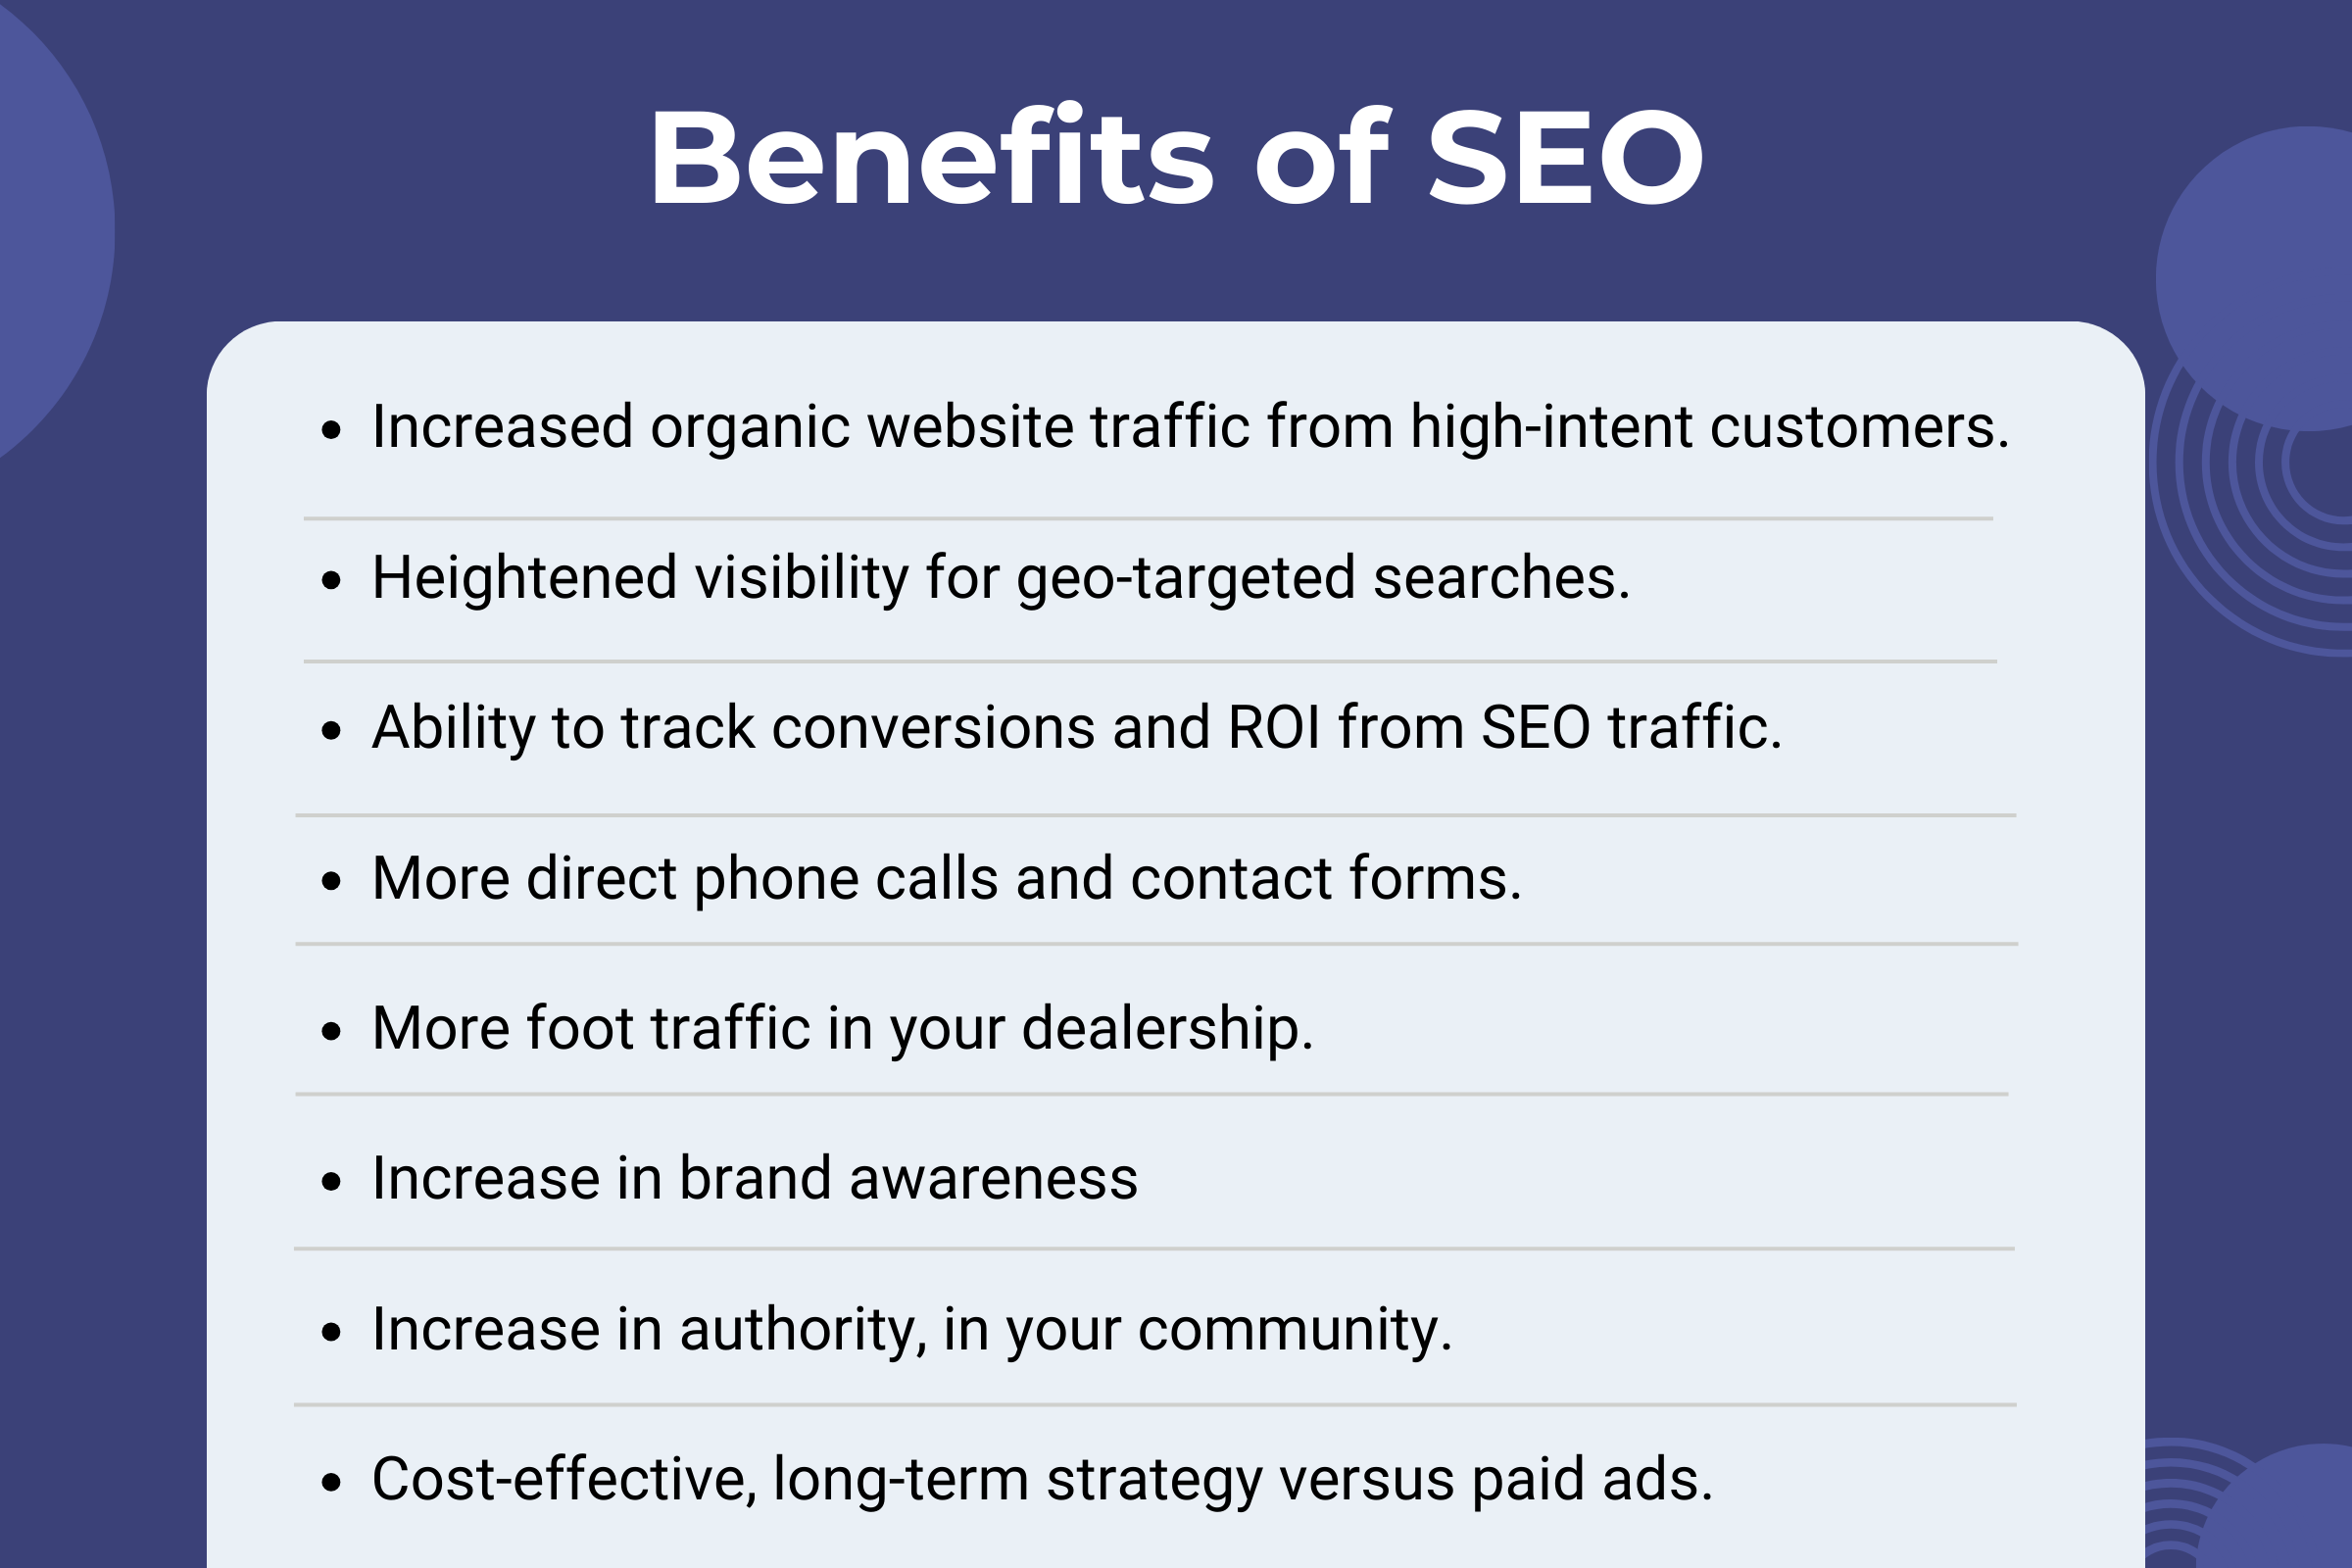 Benefits of SEO for Automotive